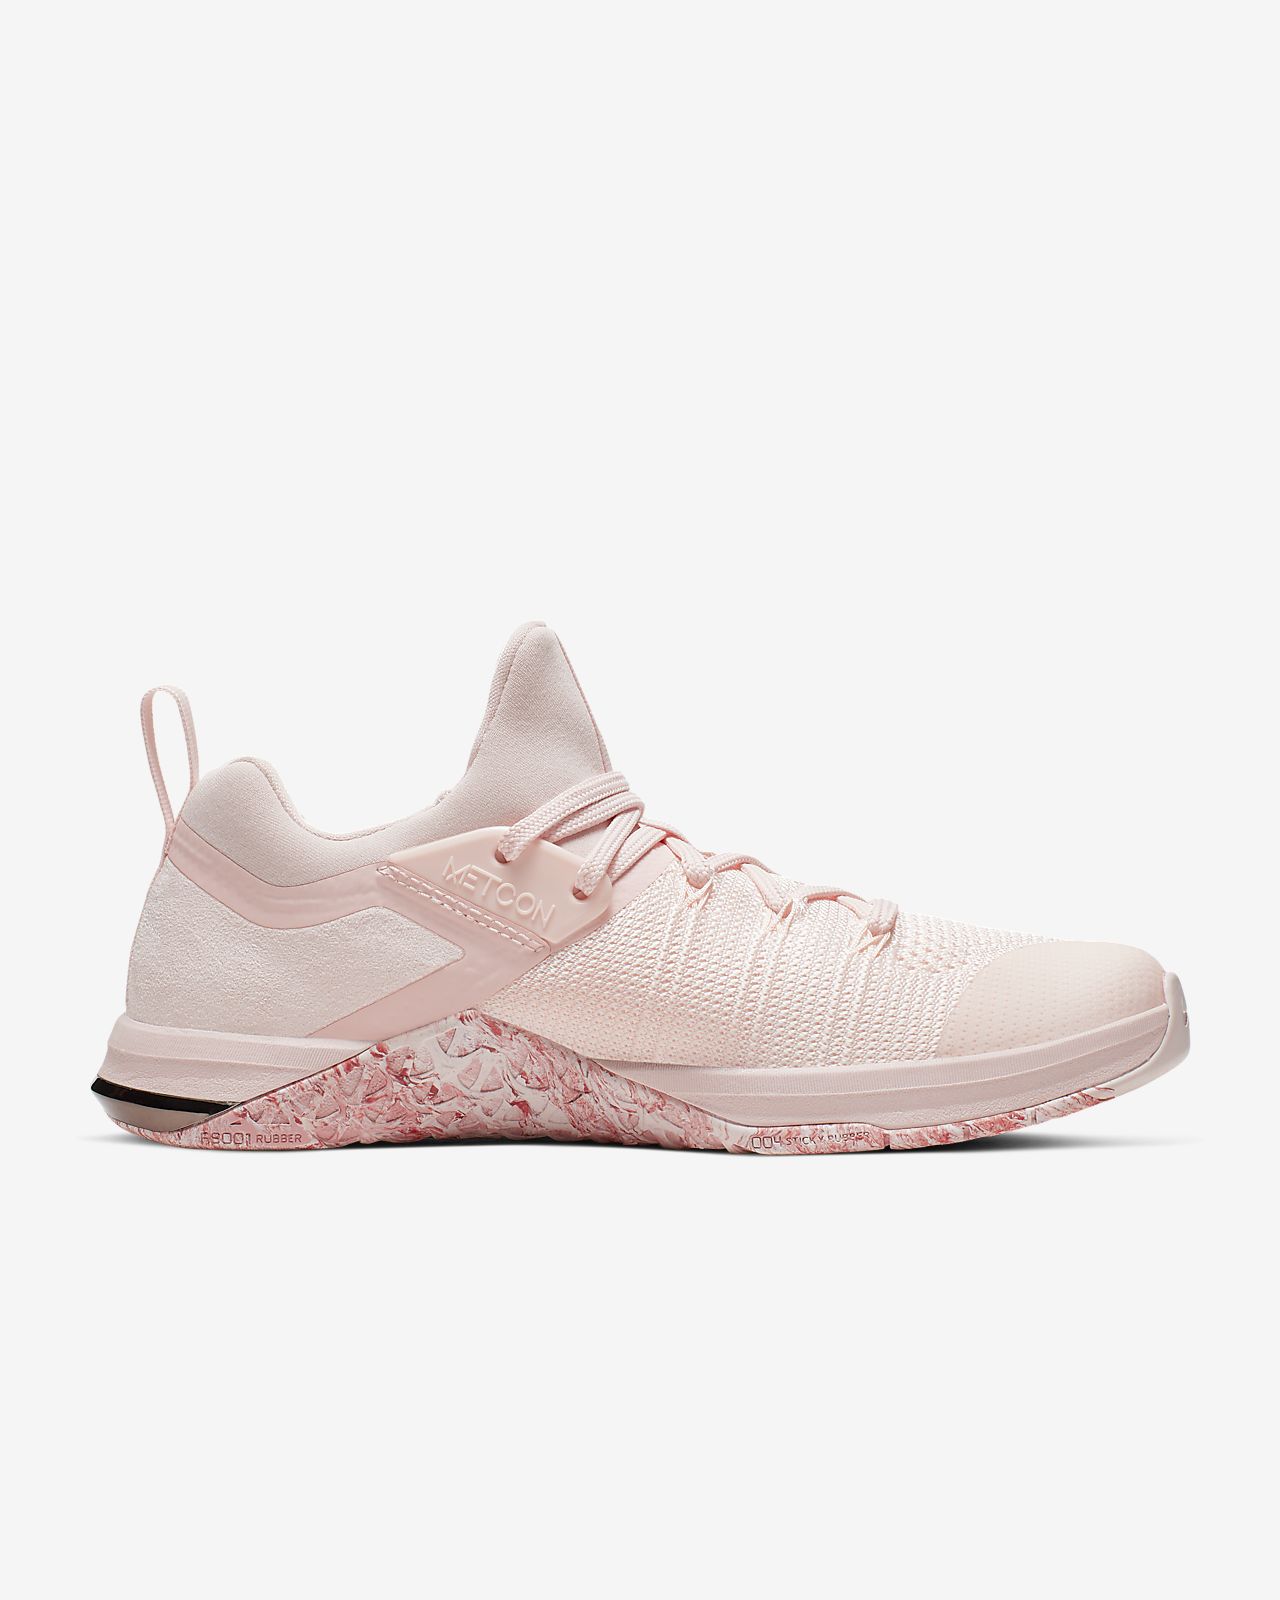 nike shoes for women pink